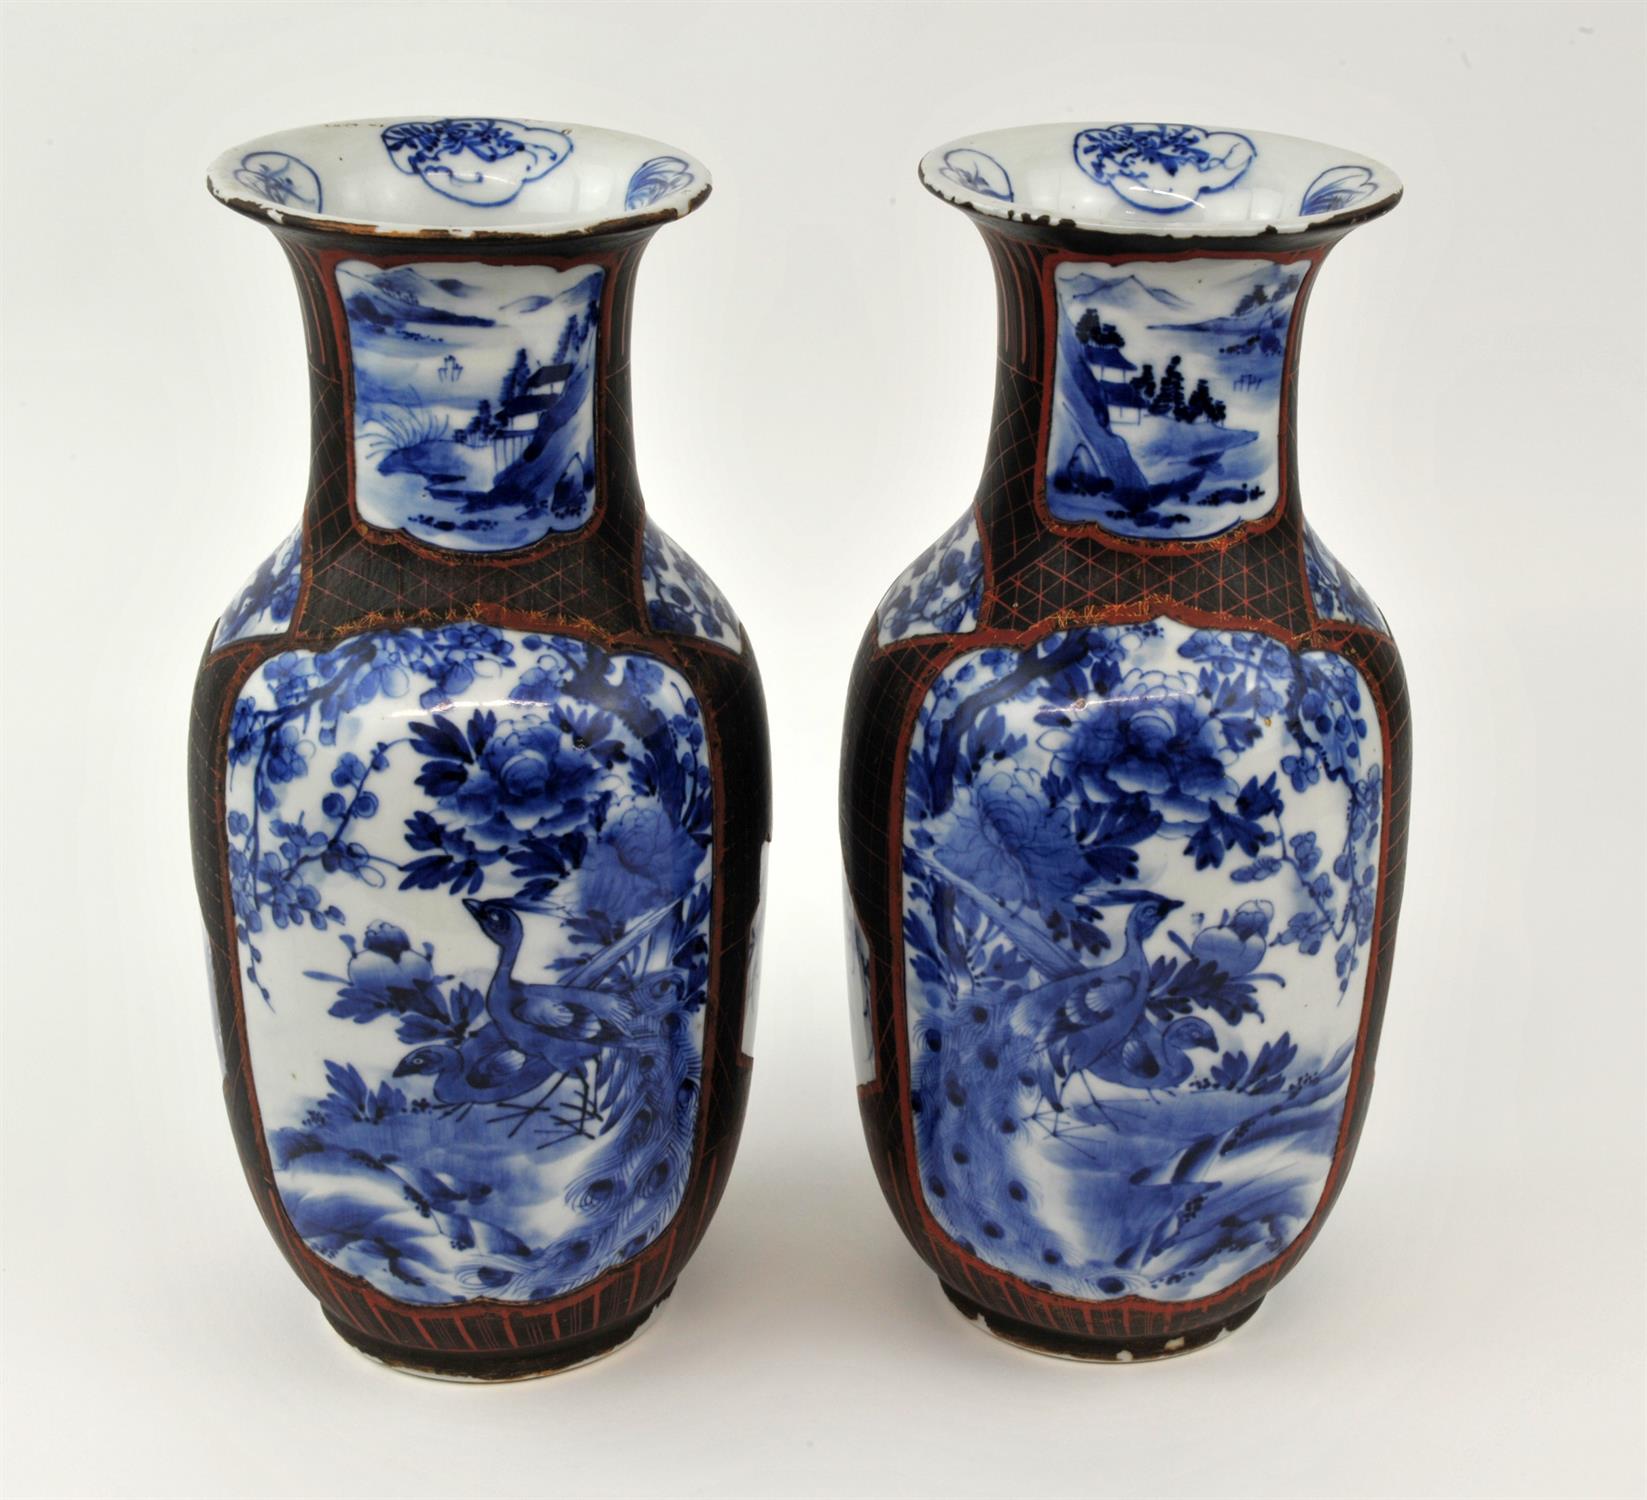 Pair of Japanese lacquered vases, Meiji period, the slender ovoid bodies decorated in underglaze